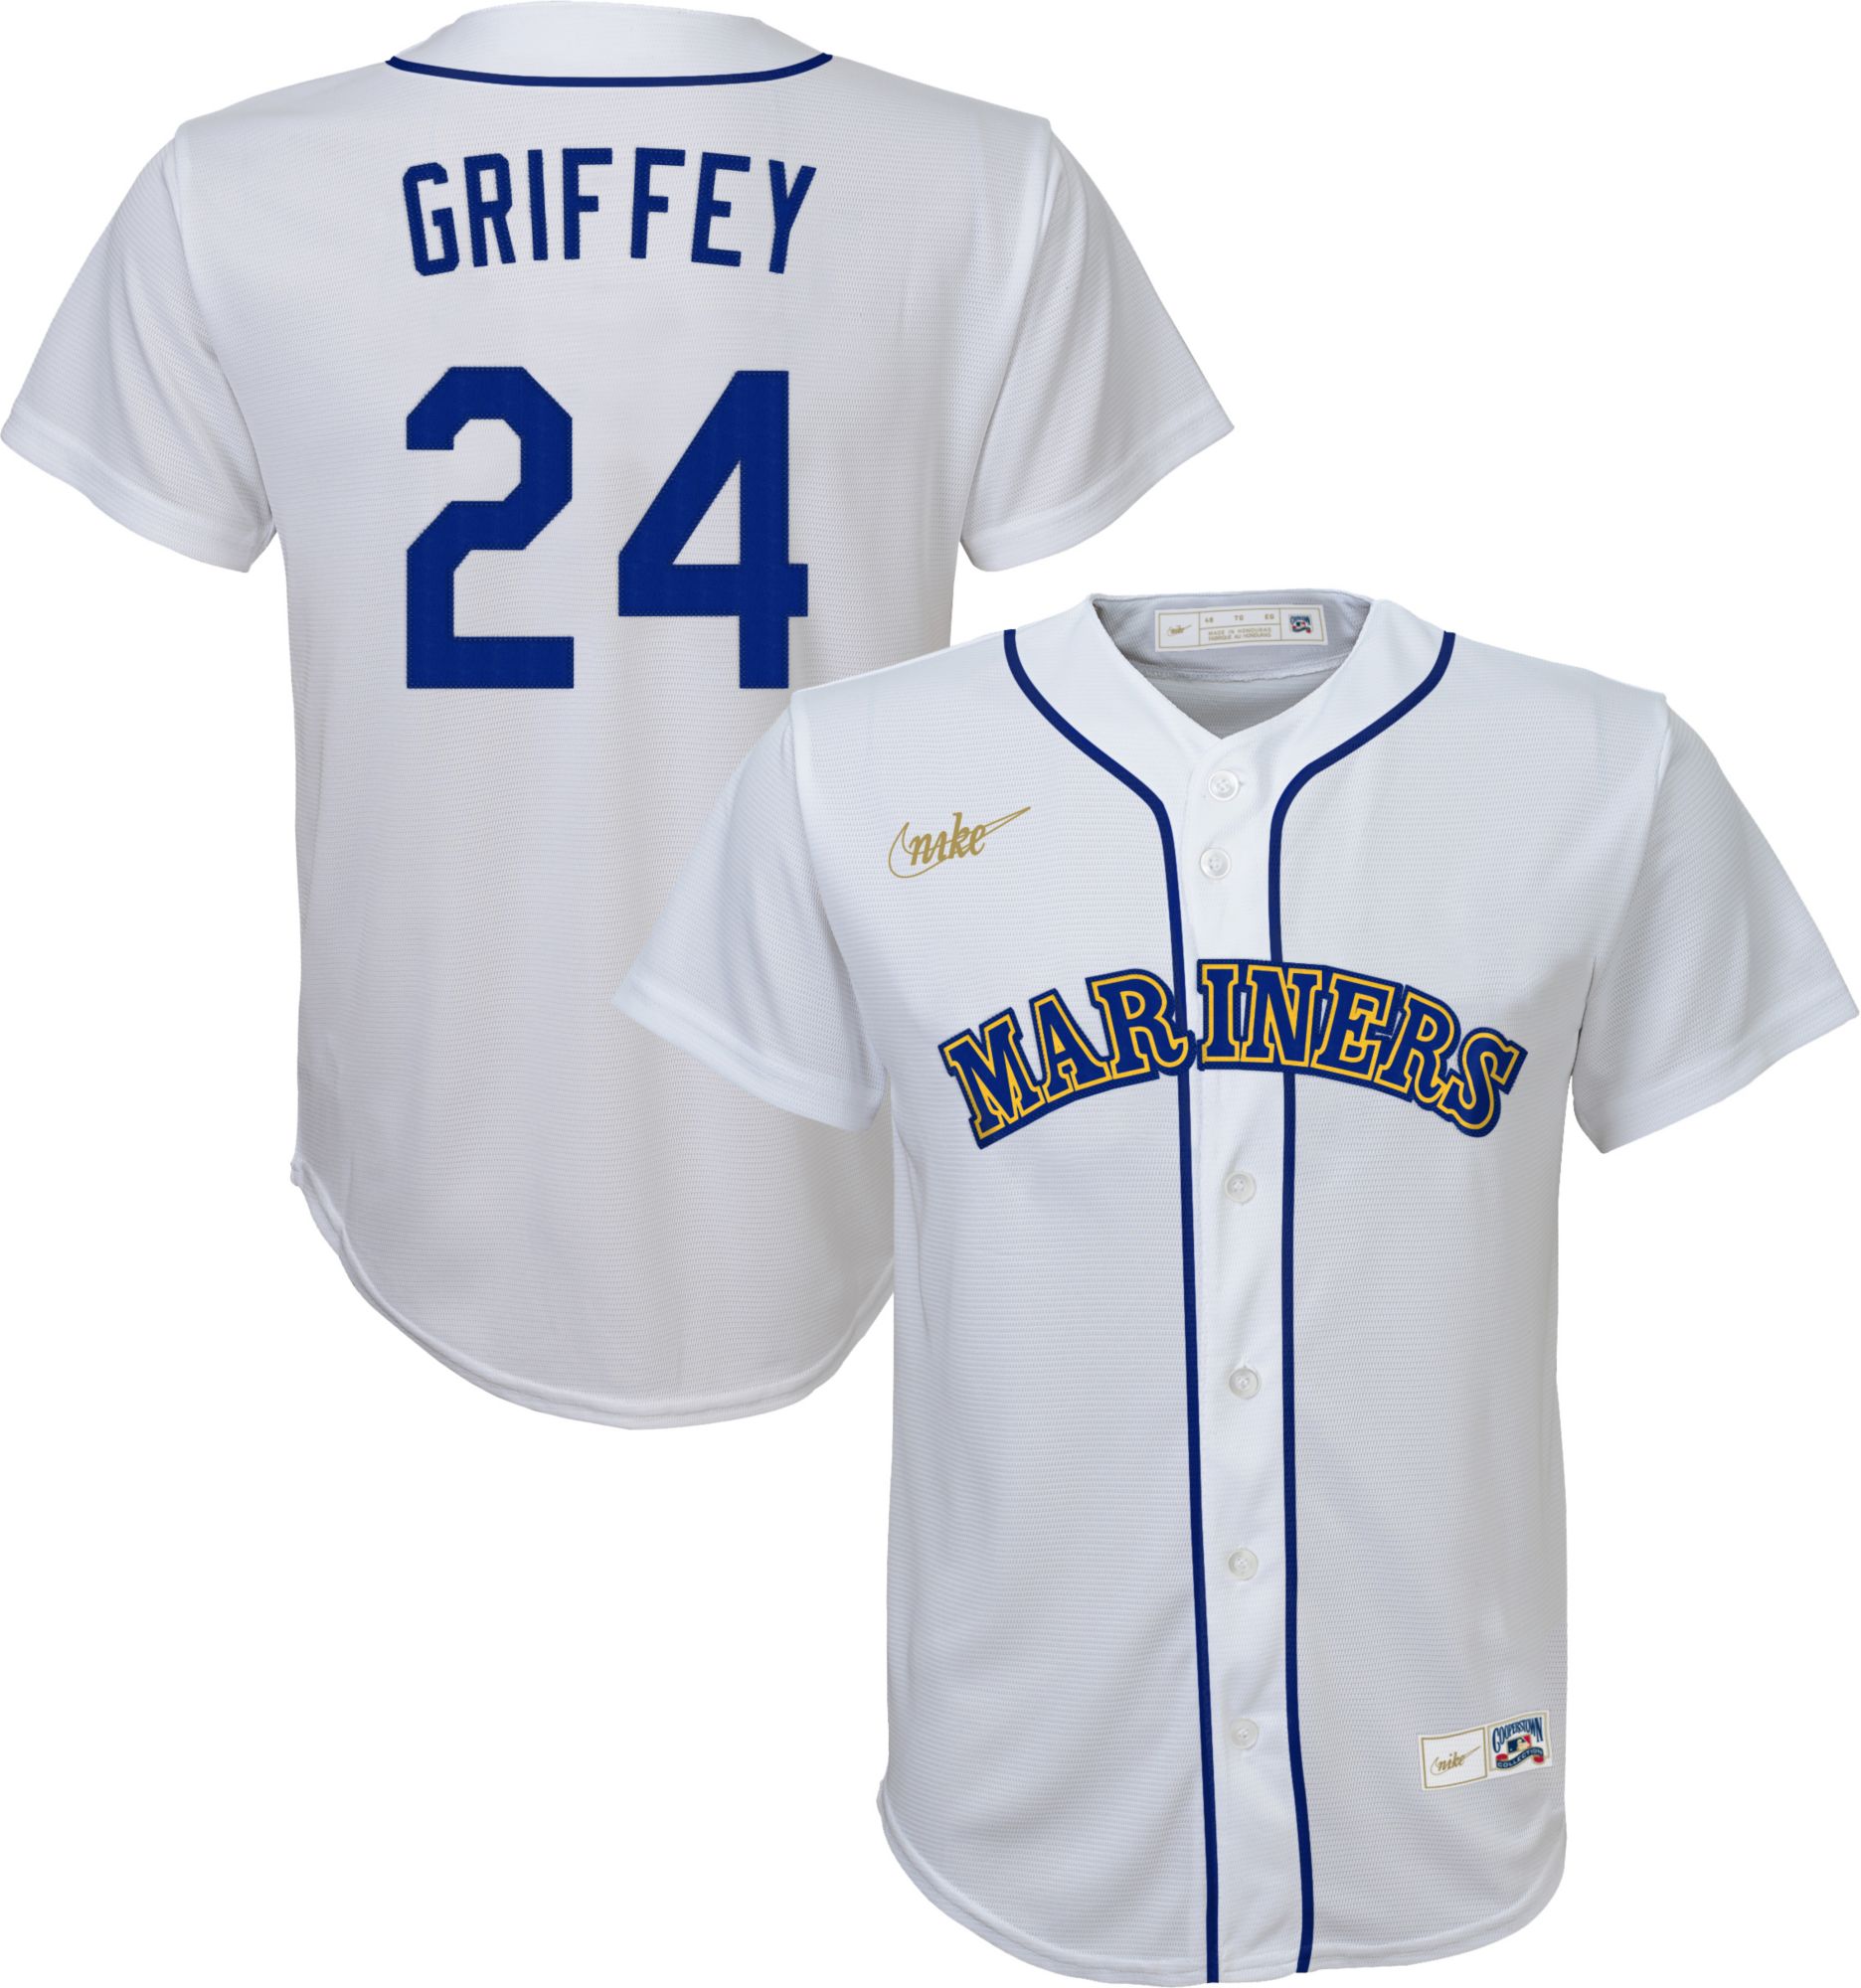 youth griffey jersey